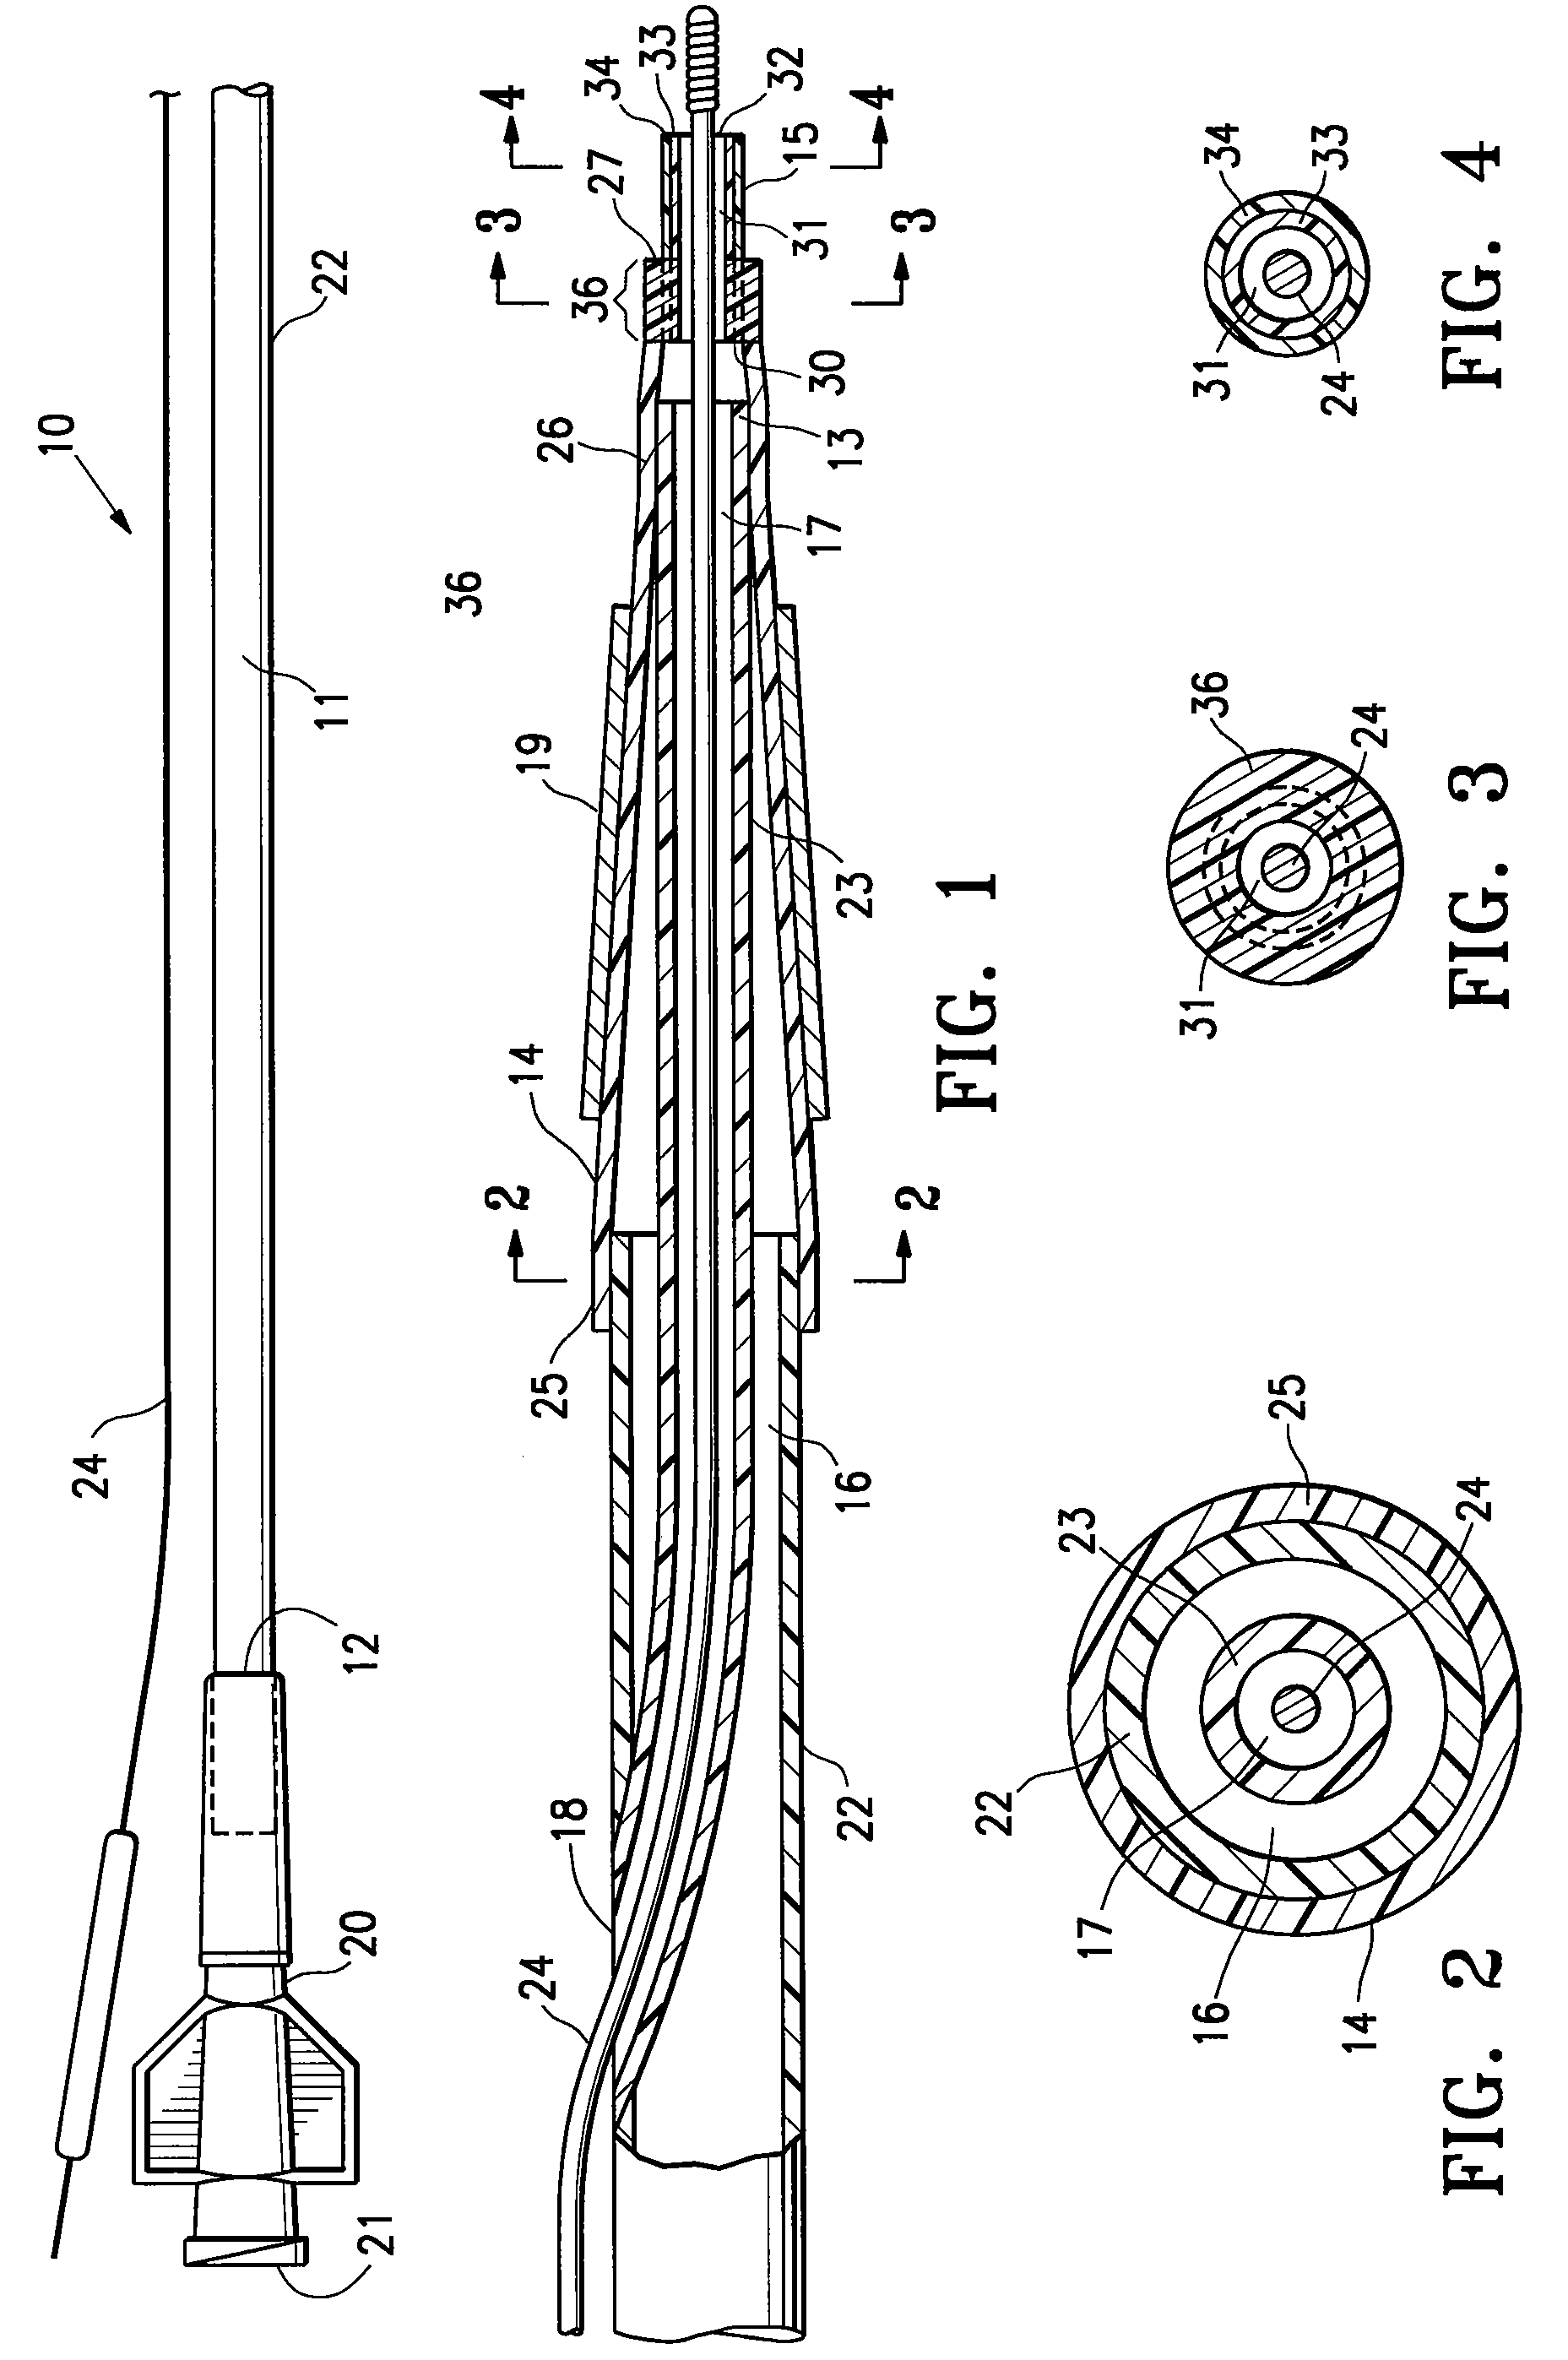 Catheter having a readily bondable multilayer soft tip